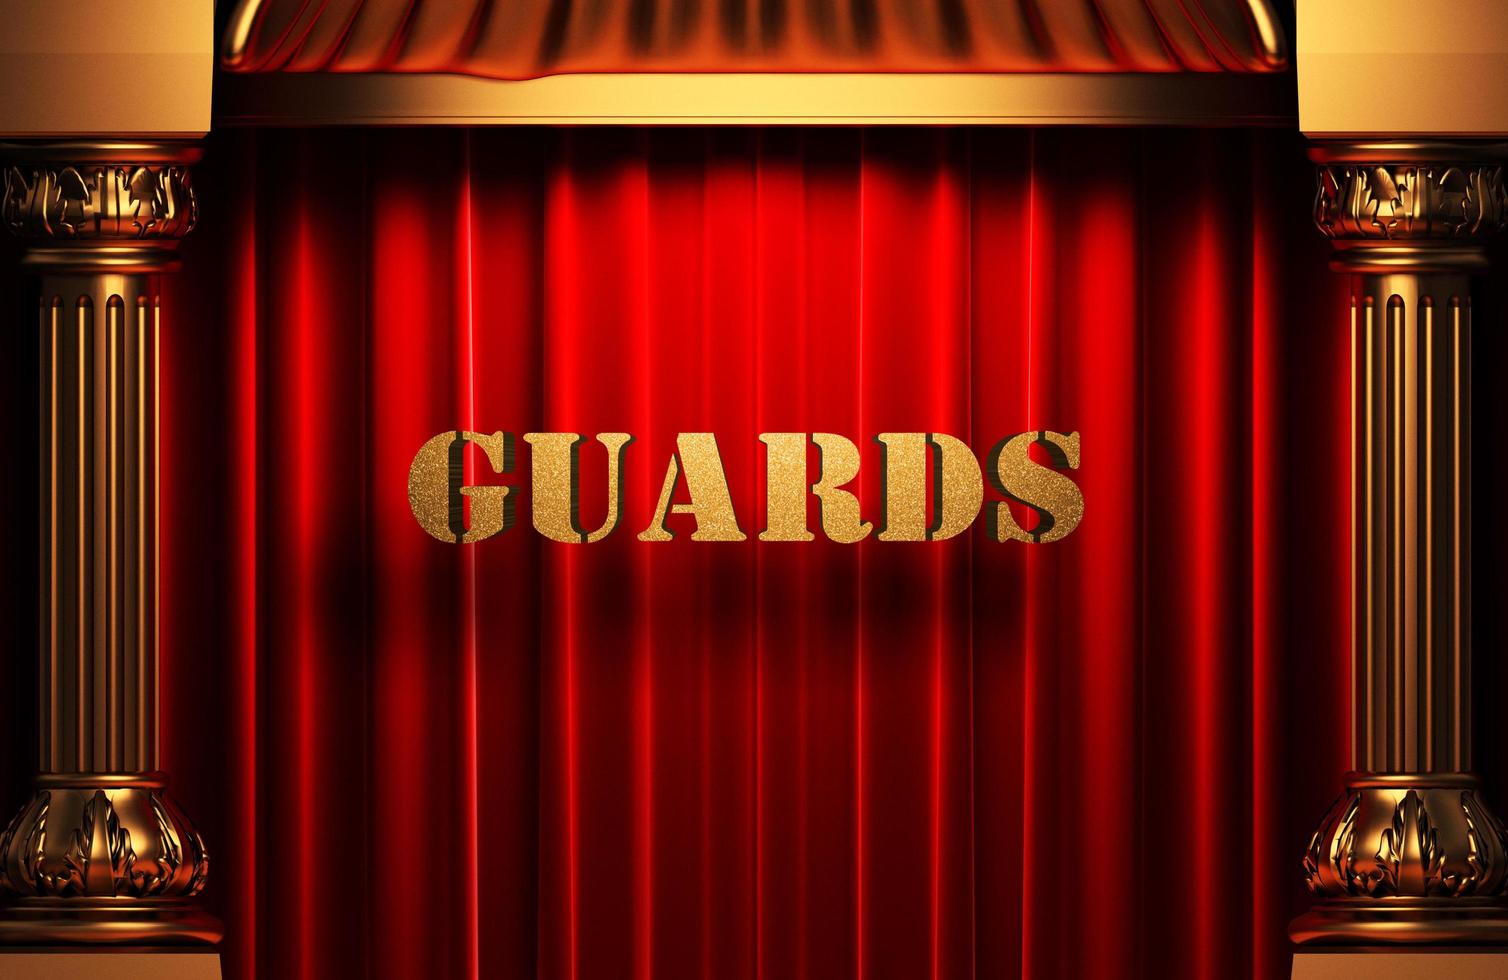 guards golden word on red curtain photo